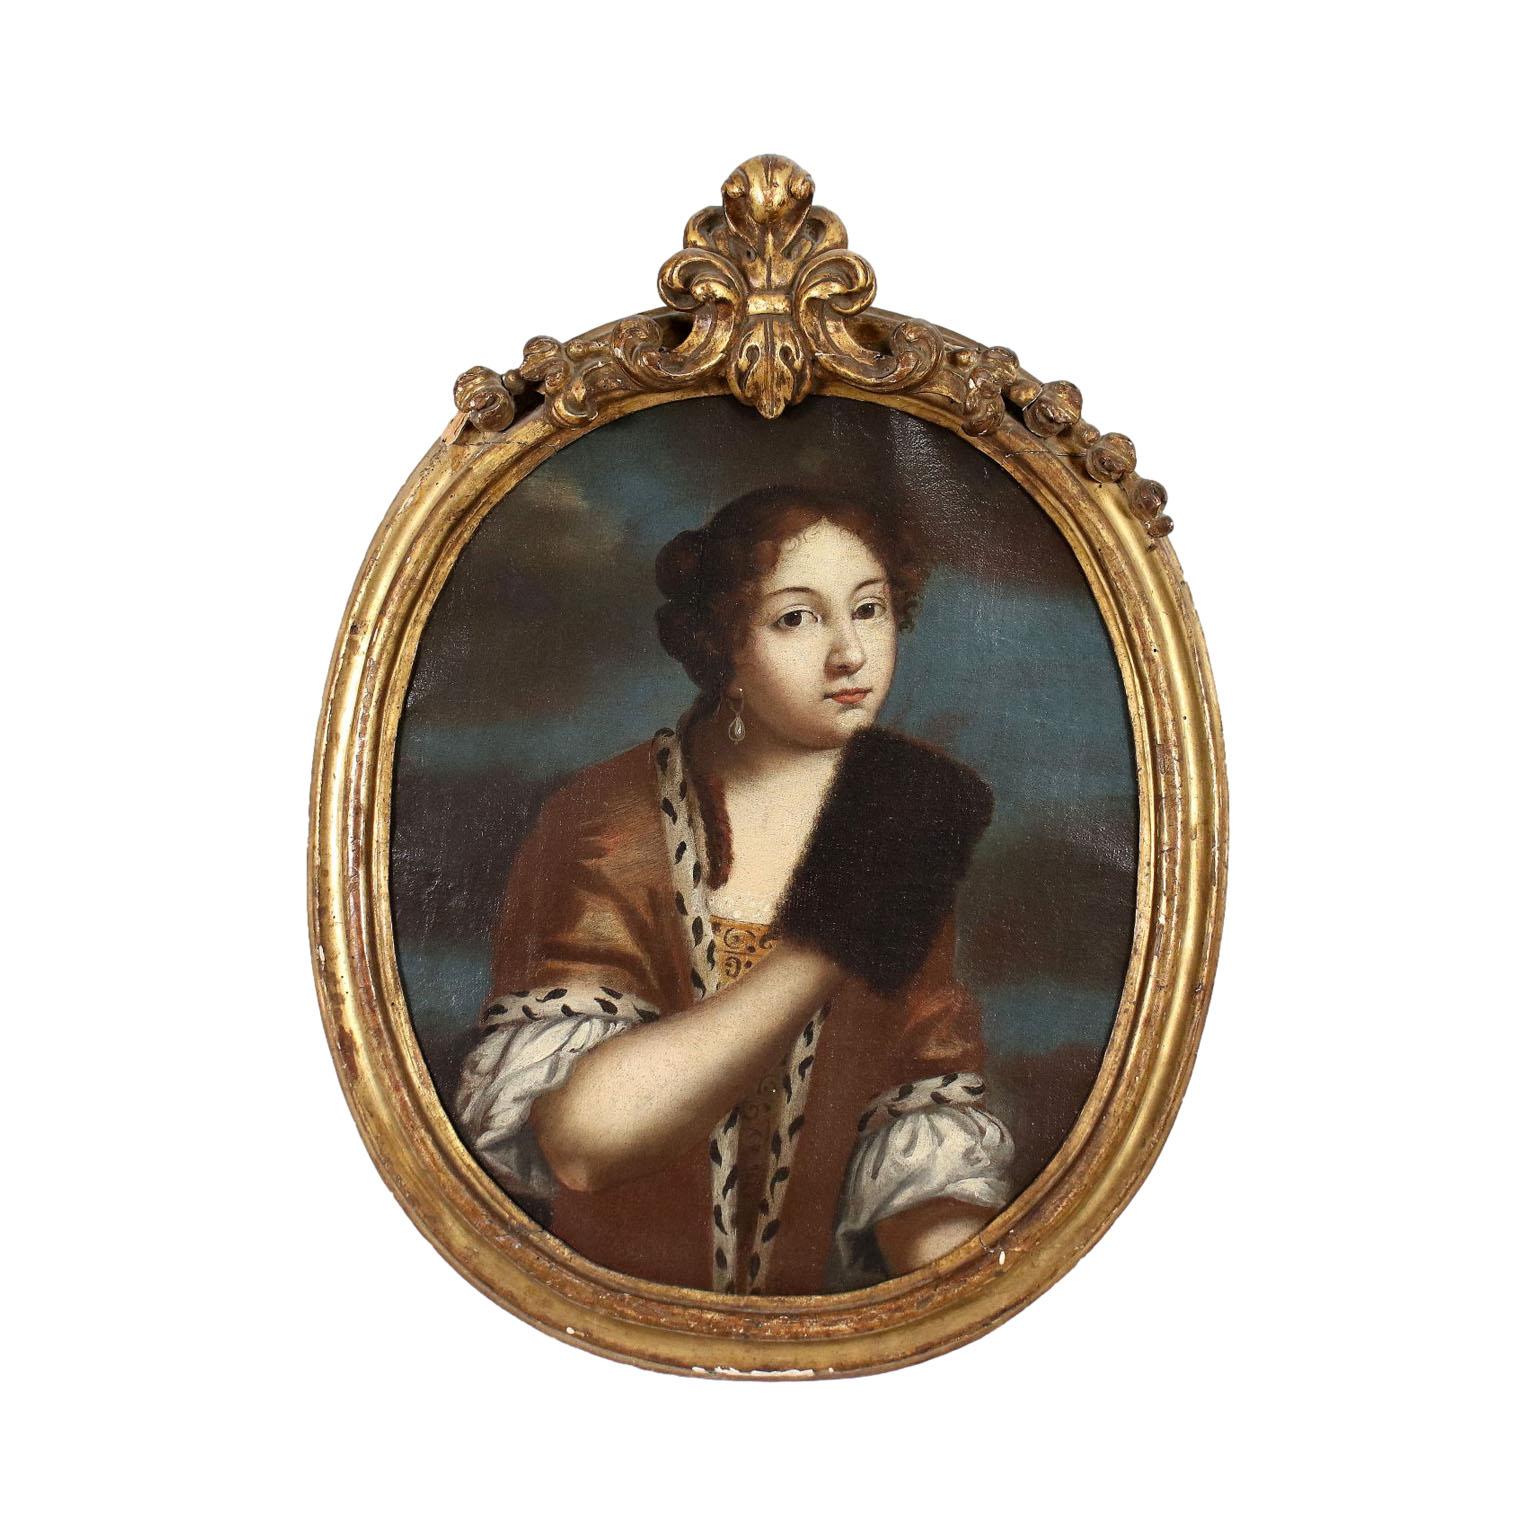 Unknown Portrait Painting - Portrait of Woman with Muff, XVIIIth century